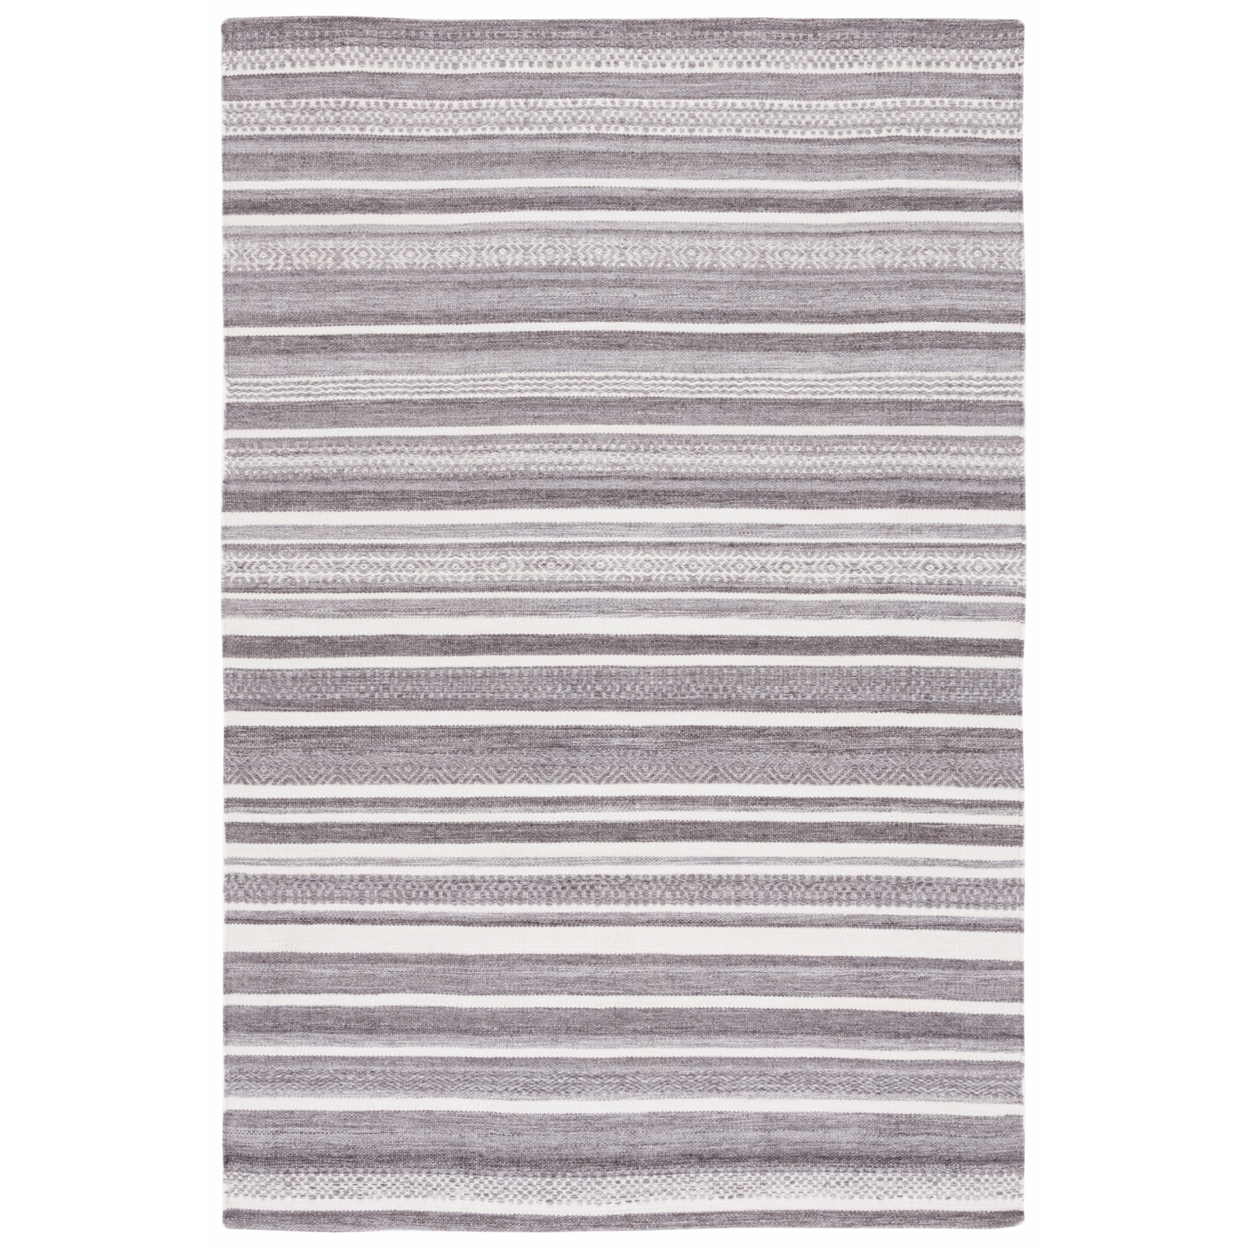 SAFAVIEH Sierra Collection SRA416A Ivory / Blue Rug - 6' X 6' Square